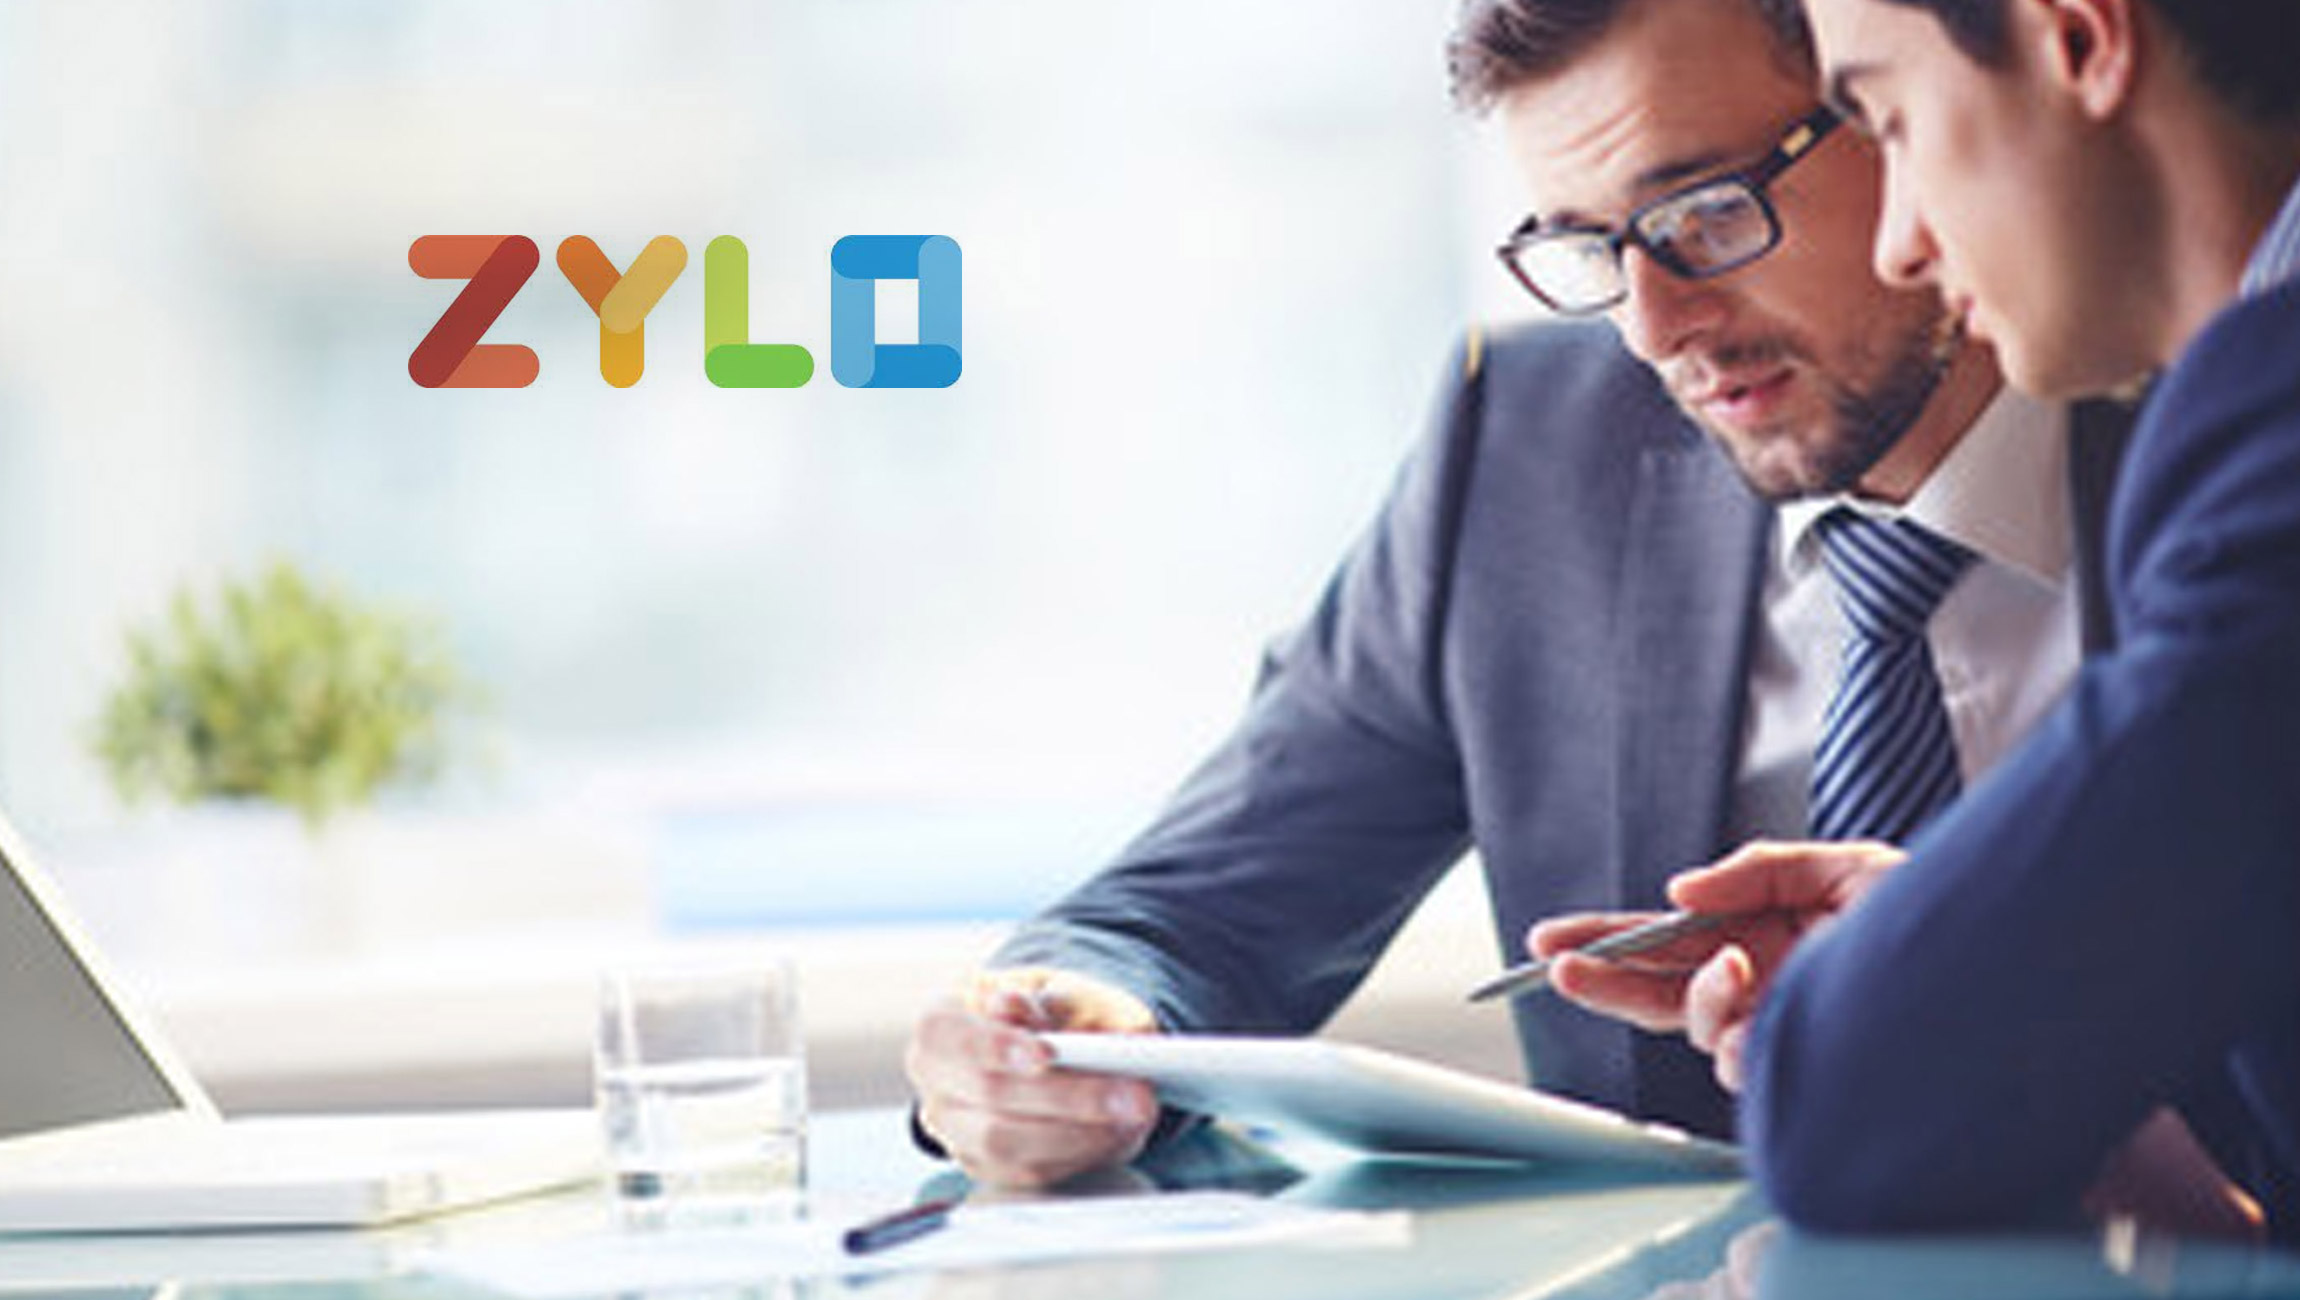 Zylo-Certified-as-Coupa-Business-Spend-Management-Platform-Ready-to-Power-Greater-Visibility-and-Control-of-SaaS-Spend